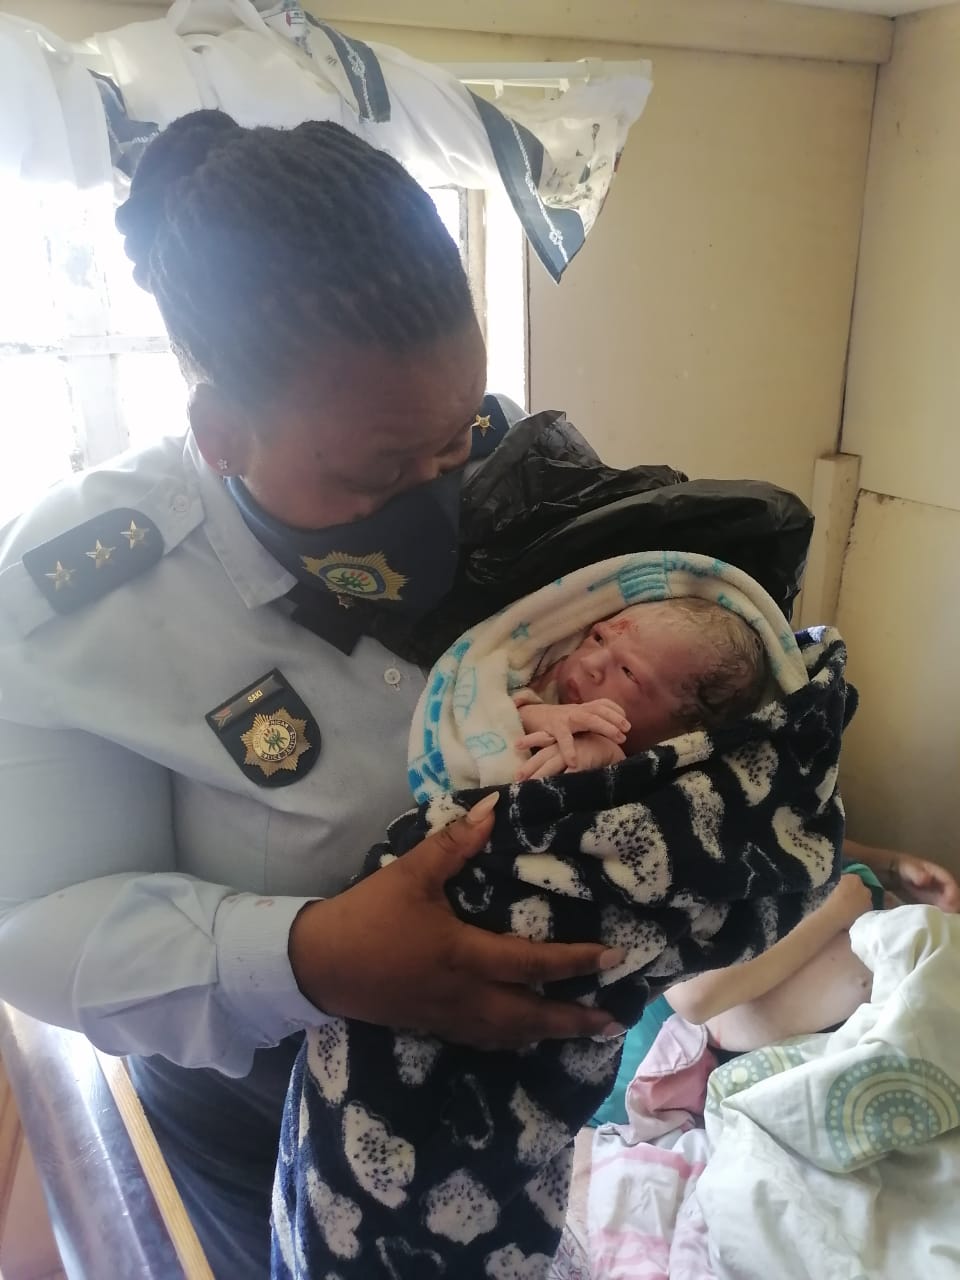 Kinkelbos Station Commander goes beyond the call of duty to help woman deliver a baby